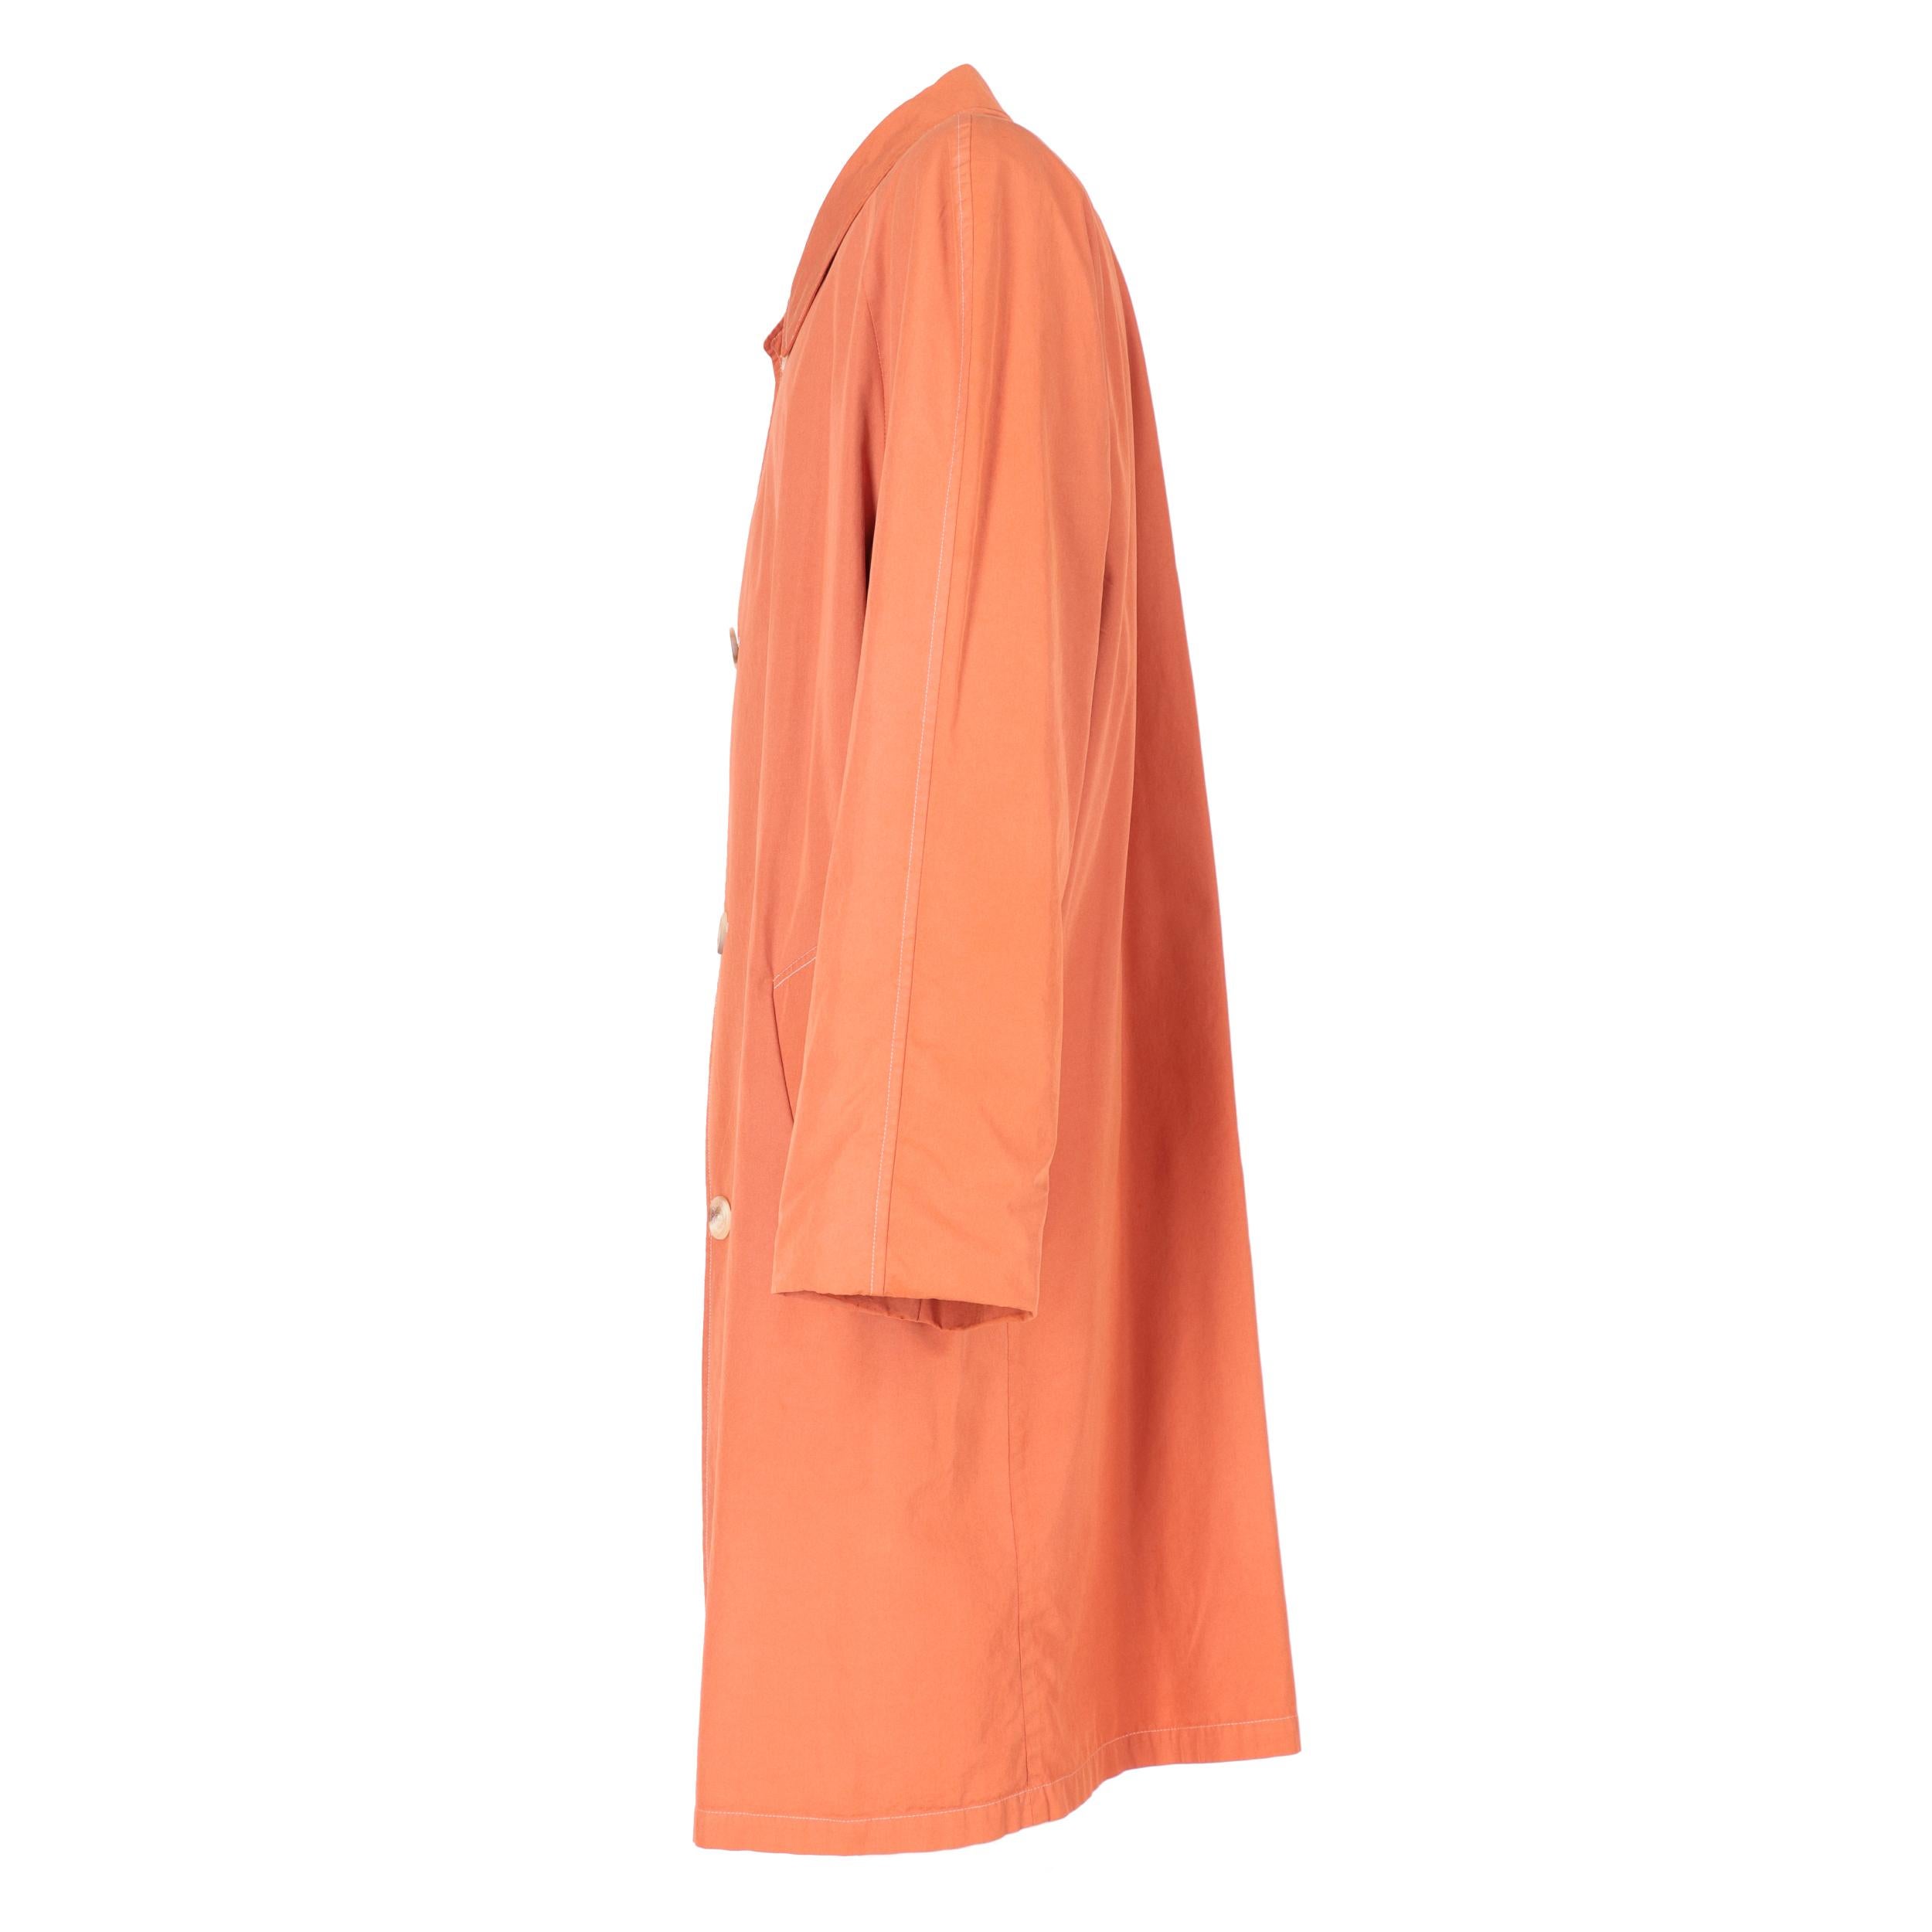 Aquascutum orange cotton raincoat. Classic collar, long raglan sleeves, front closure with buttons, two front welt pockets and slit on the back.

The product has slight shades on the fabric as shown in the pictures.
Years: 90s

Made in